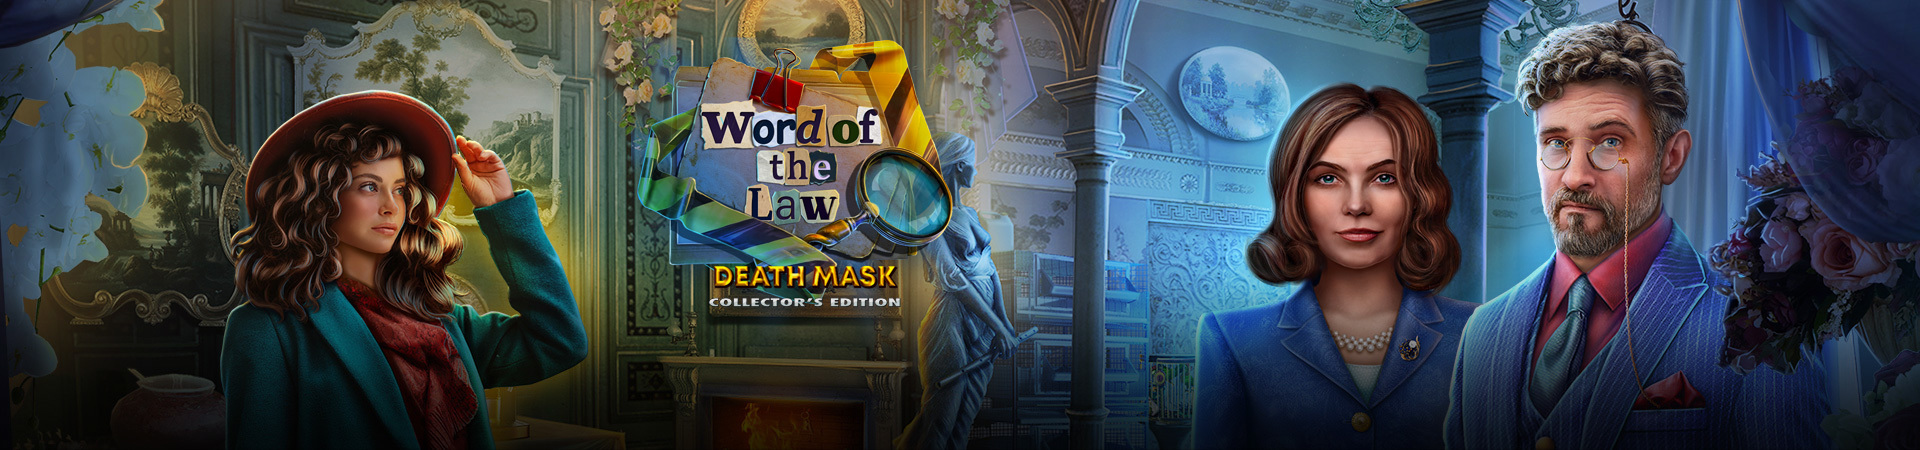 Word of the Law: Death Mask CE